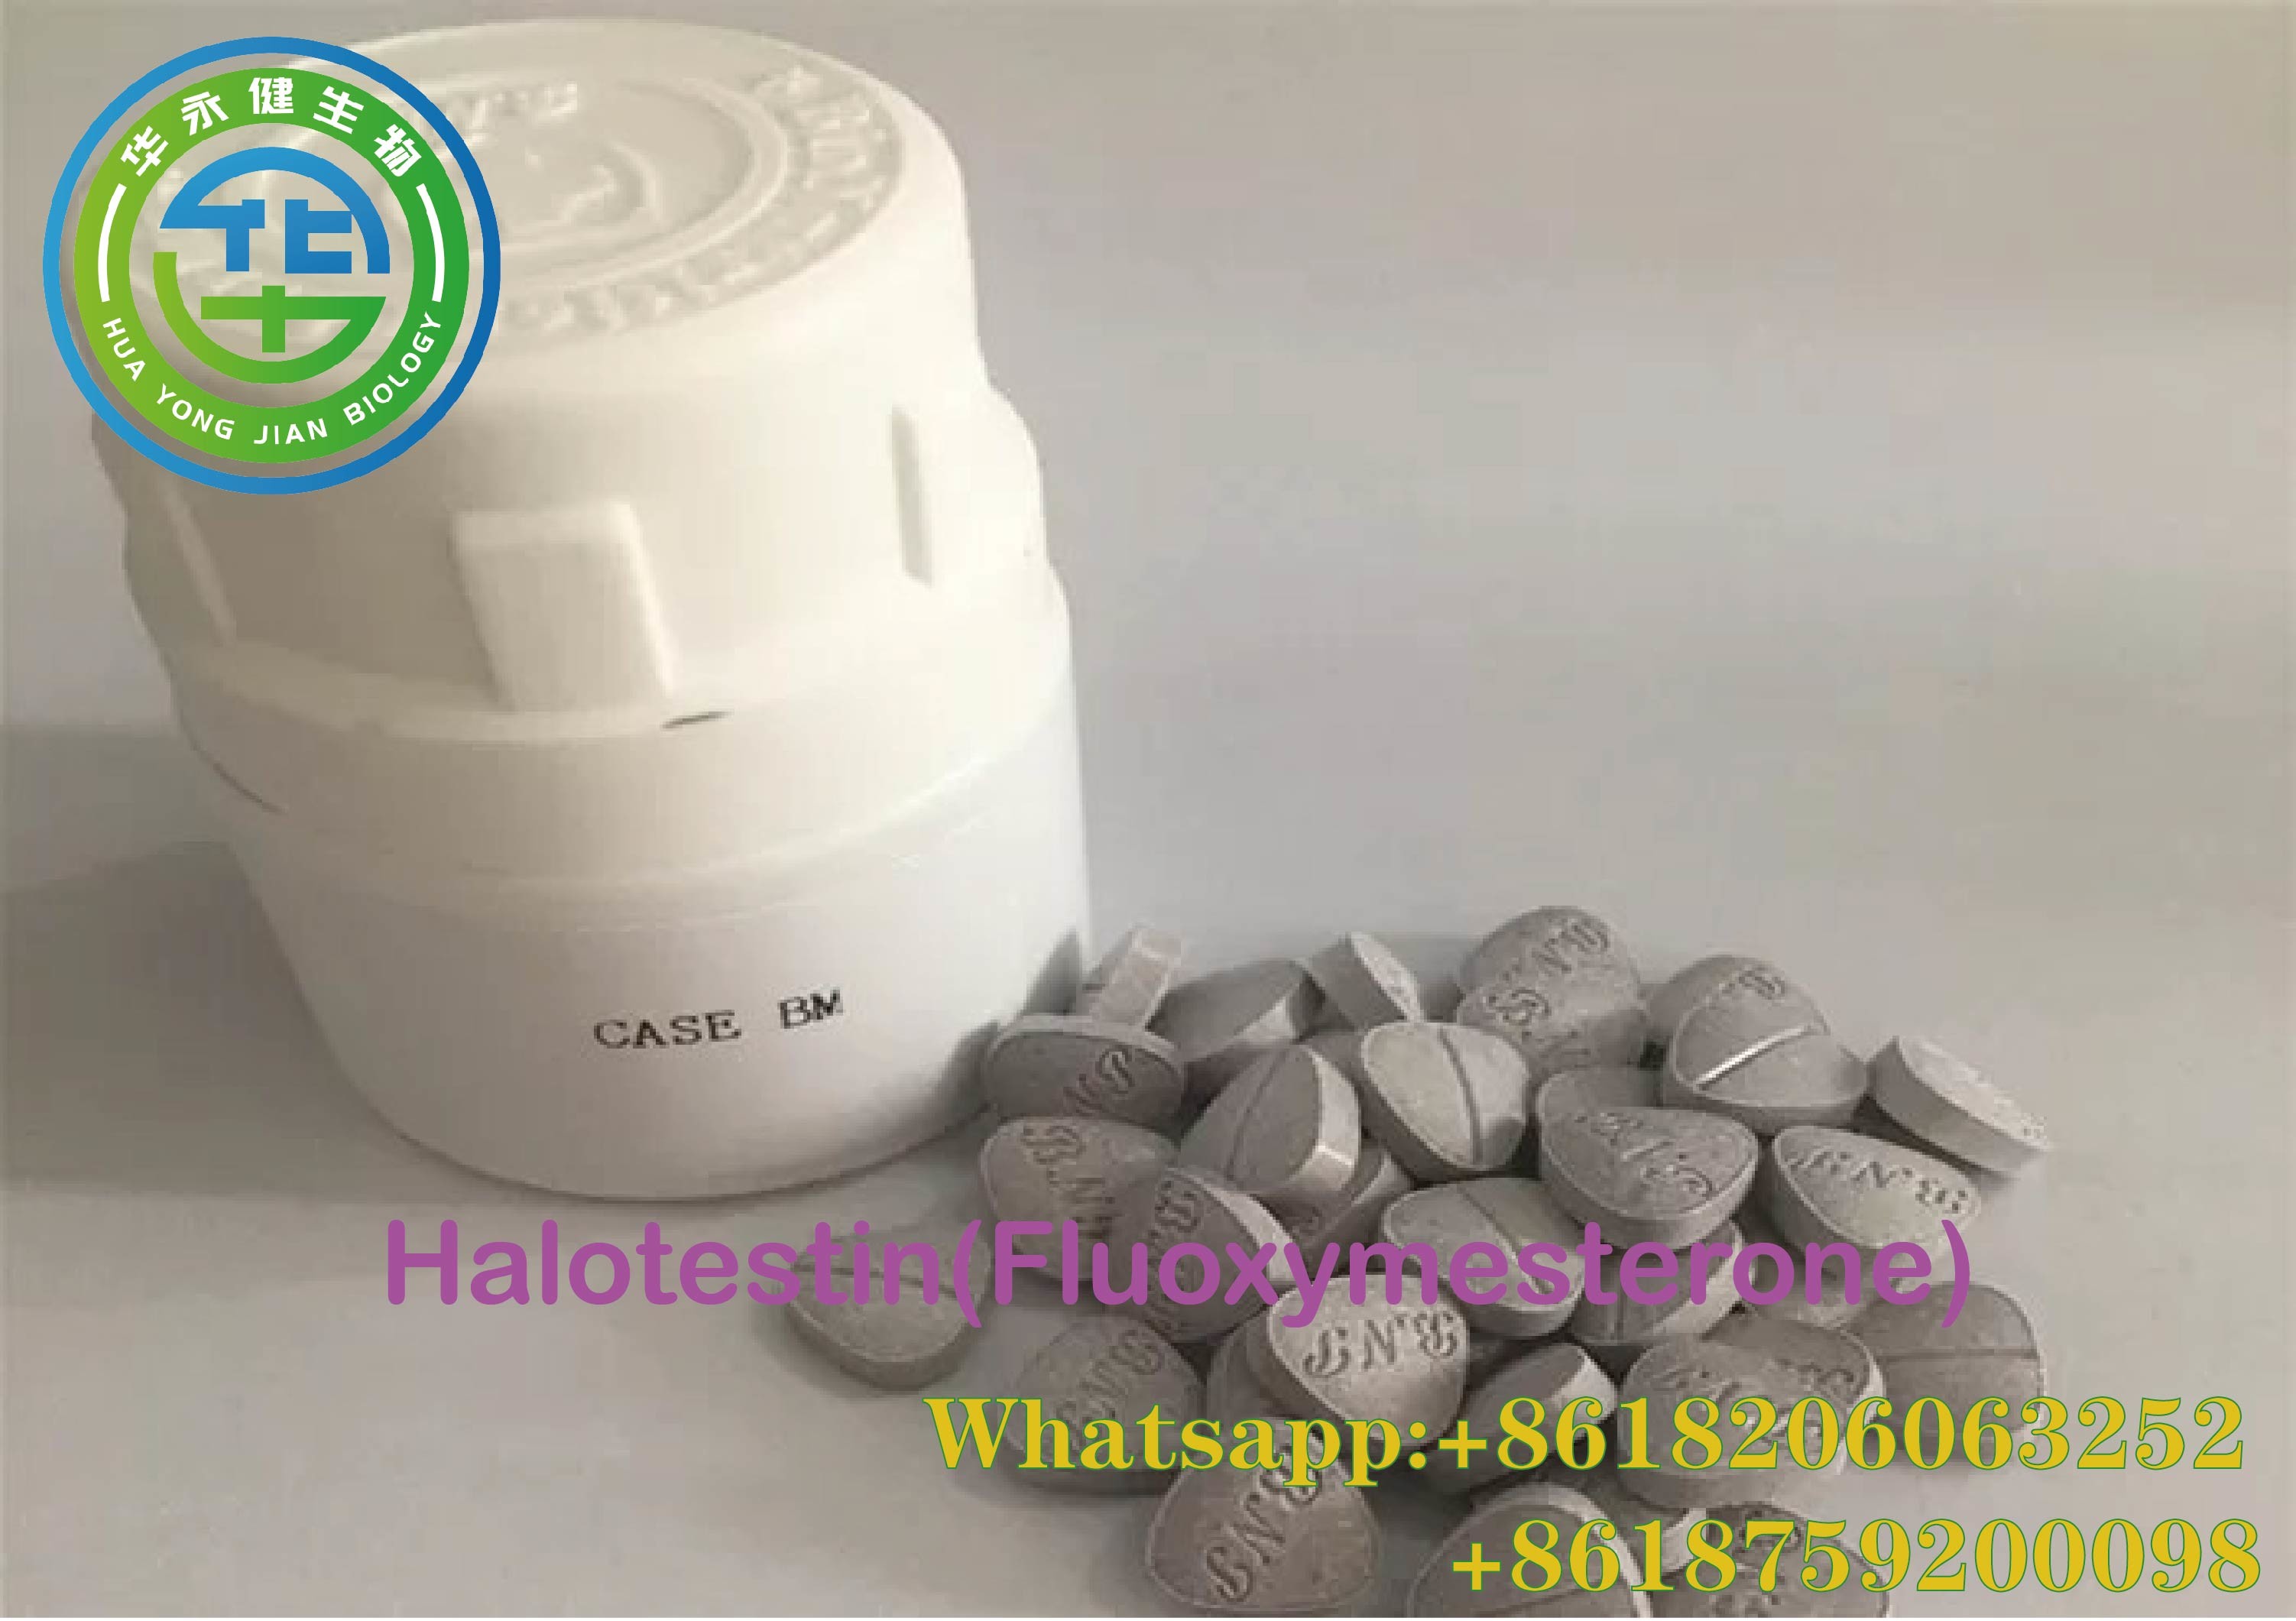 Wholesale 10mgx100/Bottle halo Halotestin Fluoxymesterone Bodybuilding Builds Lean Muscle CAS 76-43-7 from china suppliers